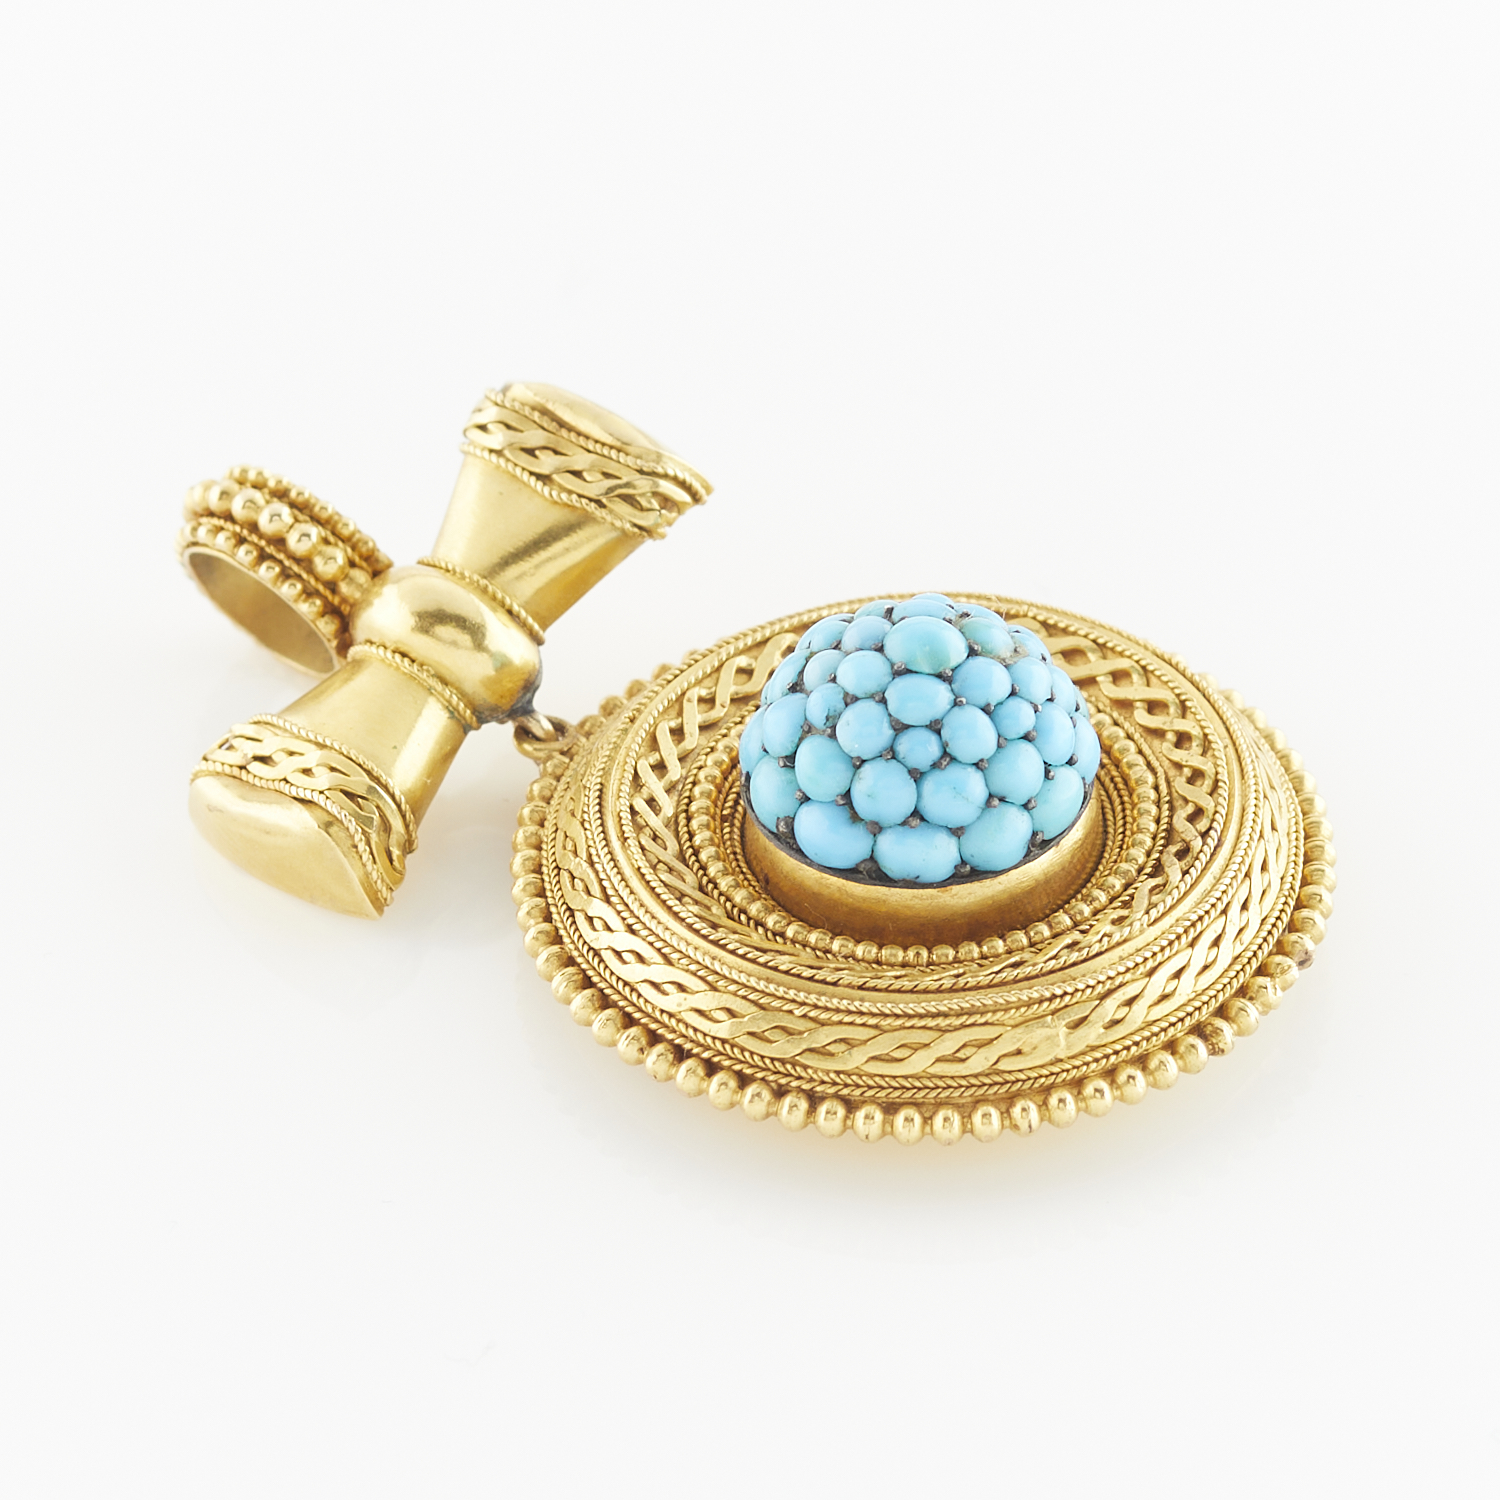 Etruscan Revival Gold & Turquoise Pendant - Image 3 of 8